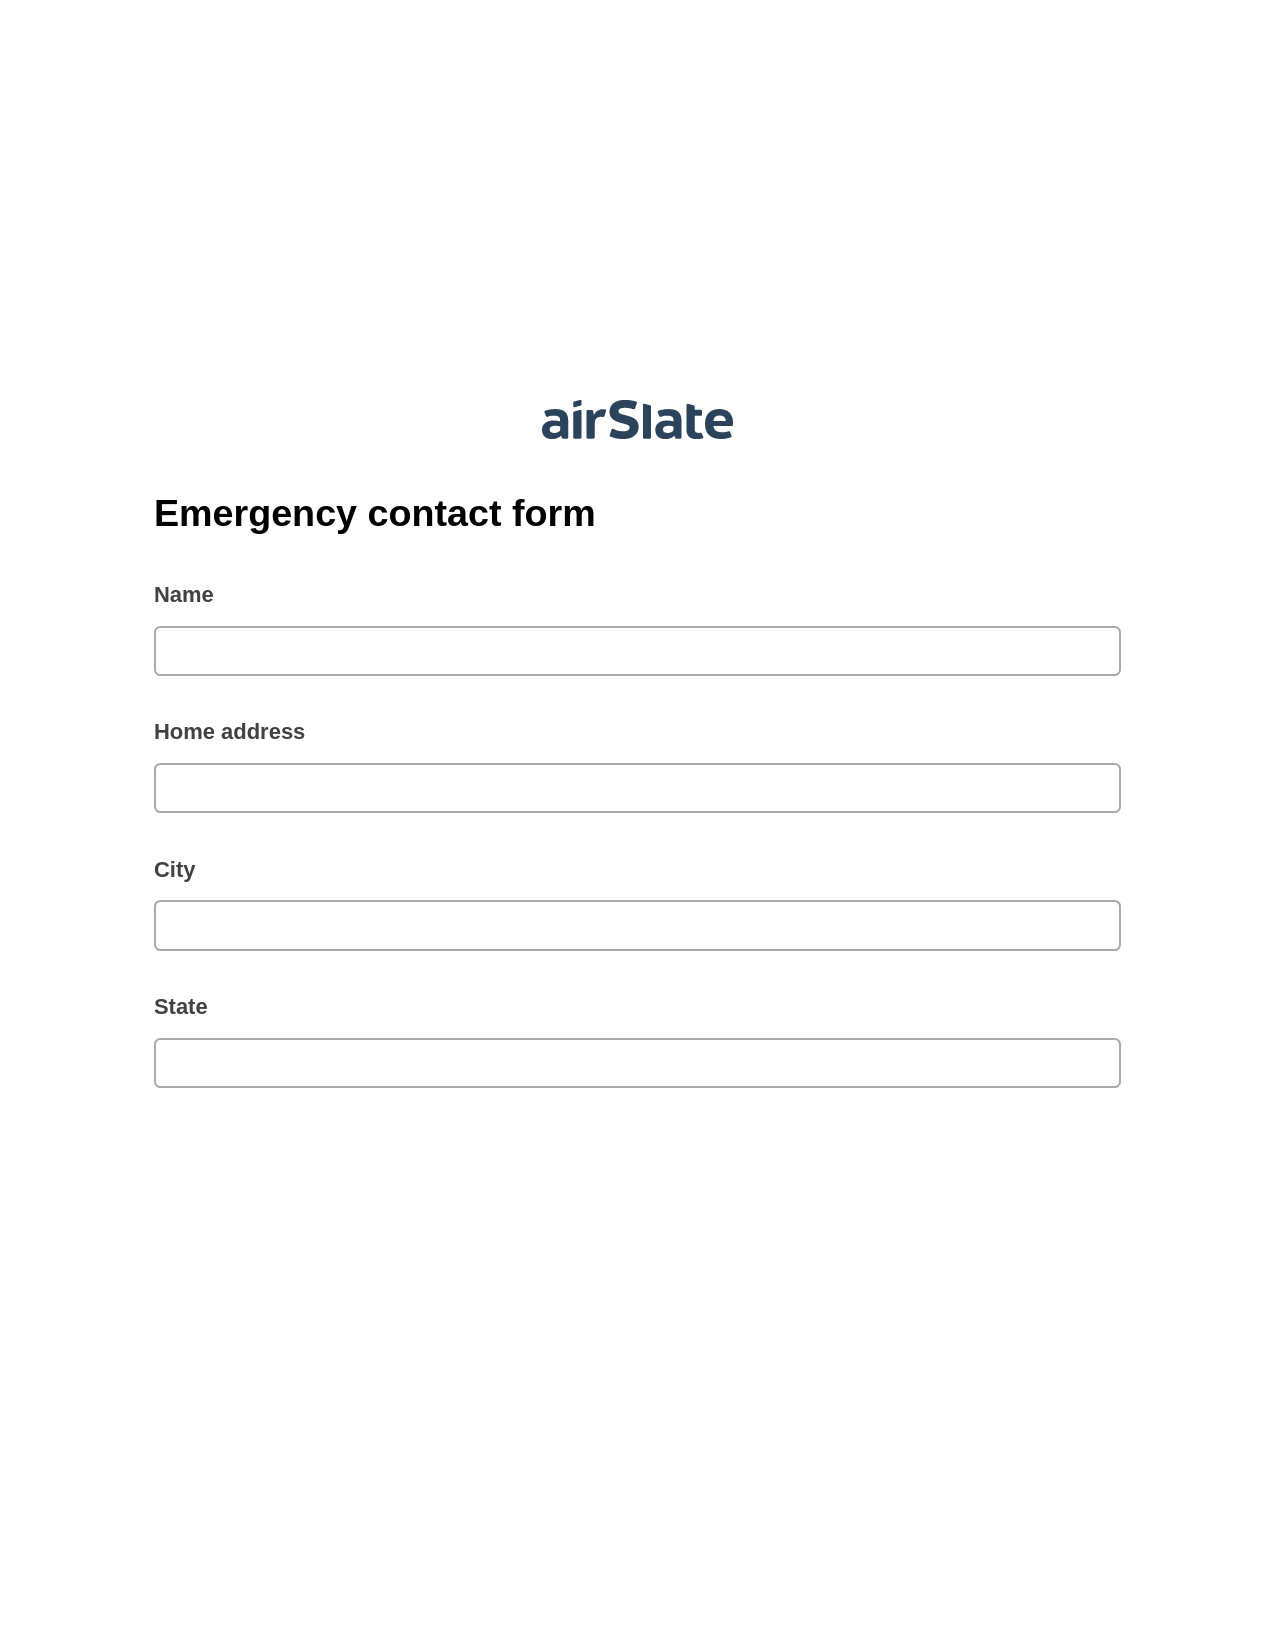 Emergency contact form Pre-fill Dropdown from Airtable, Update NetSuite Records Bot, Slack Two-Way Binding Bot